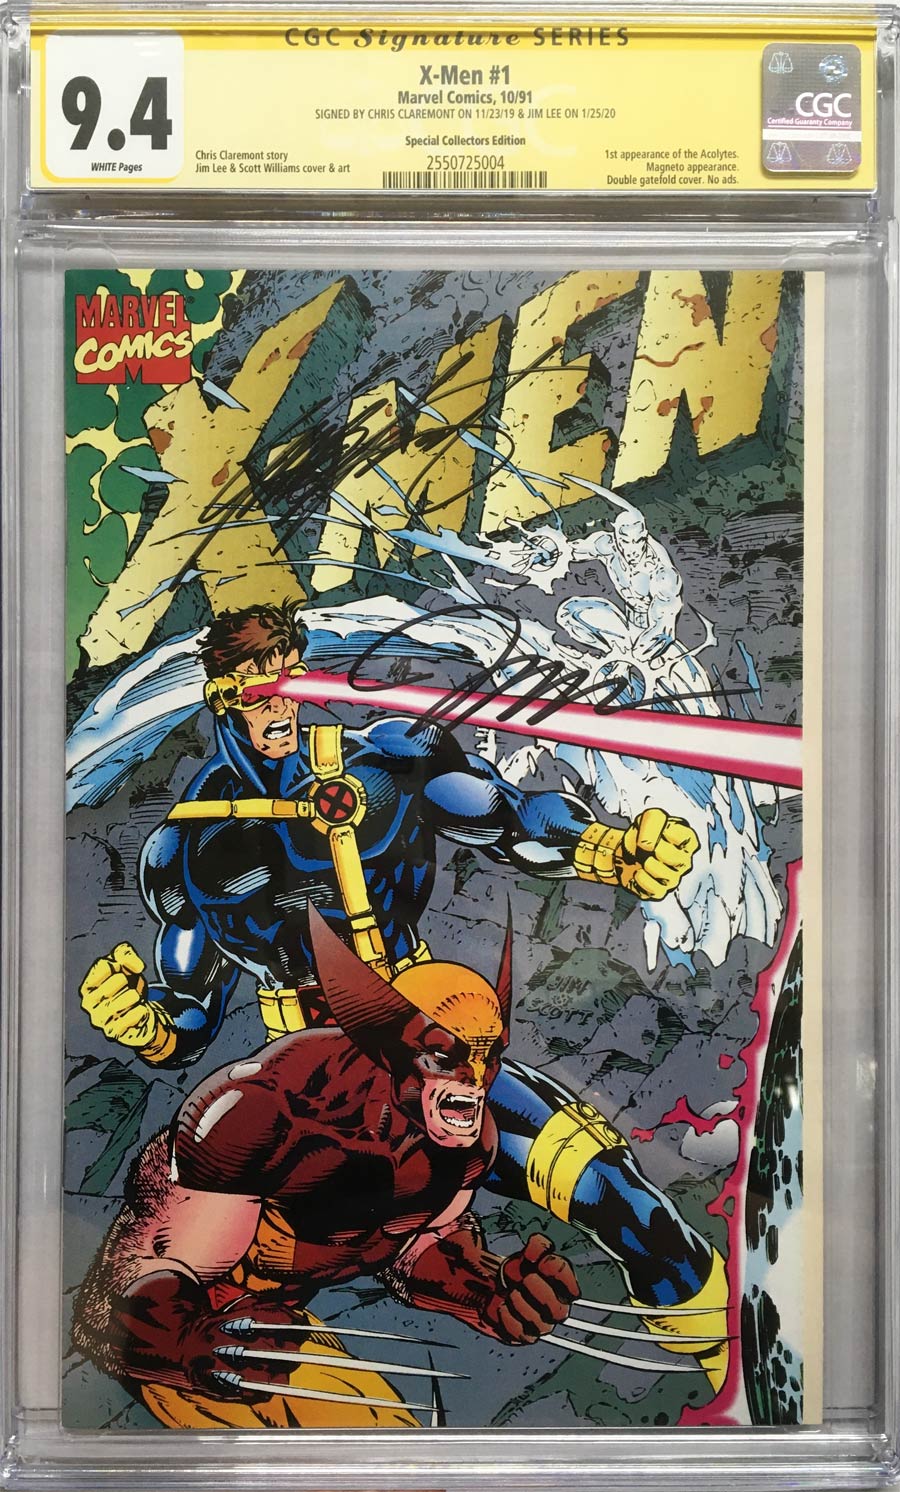 X-Men Vol 2 #1 Cover O CGC SS 9.4 Signed By Chris Claremont Jim Lee